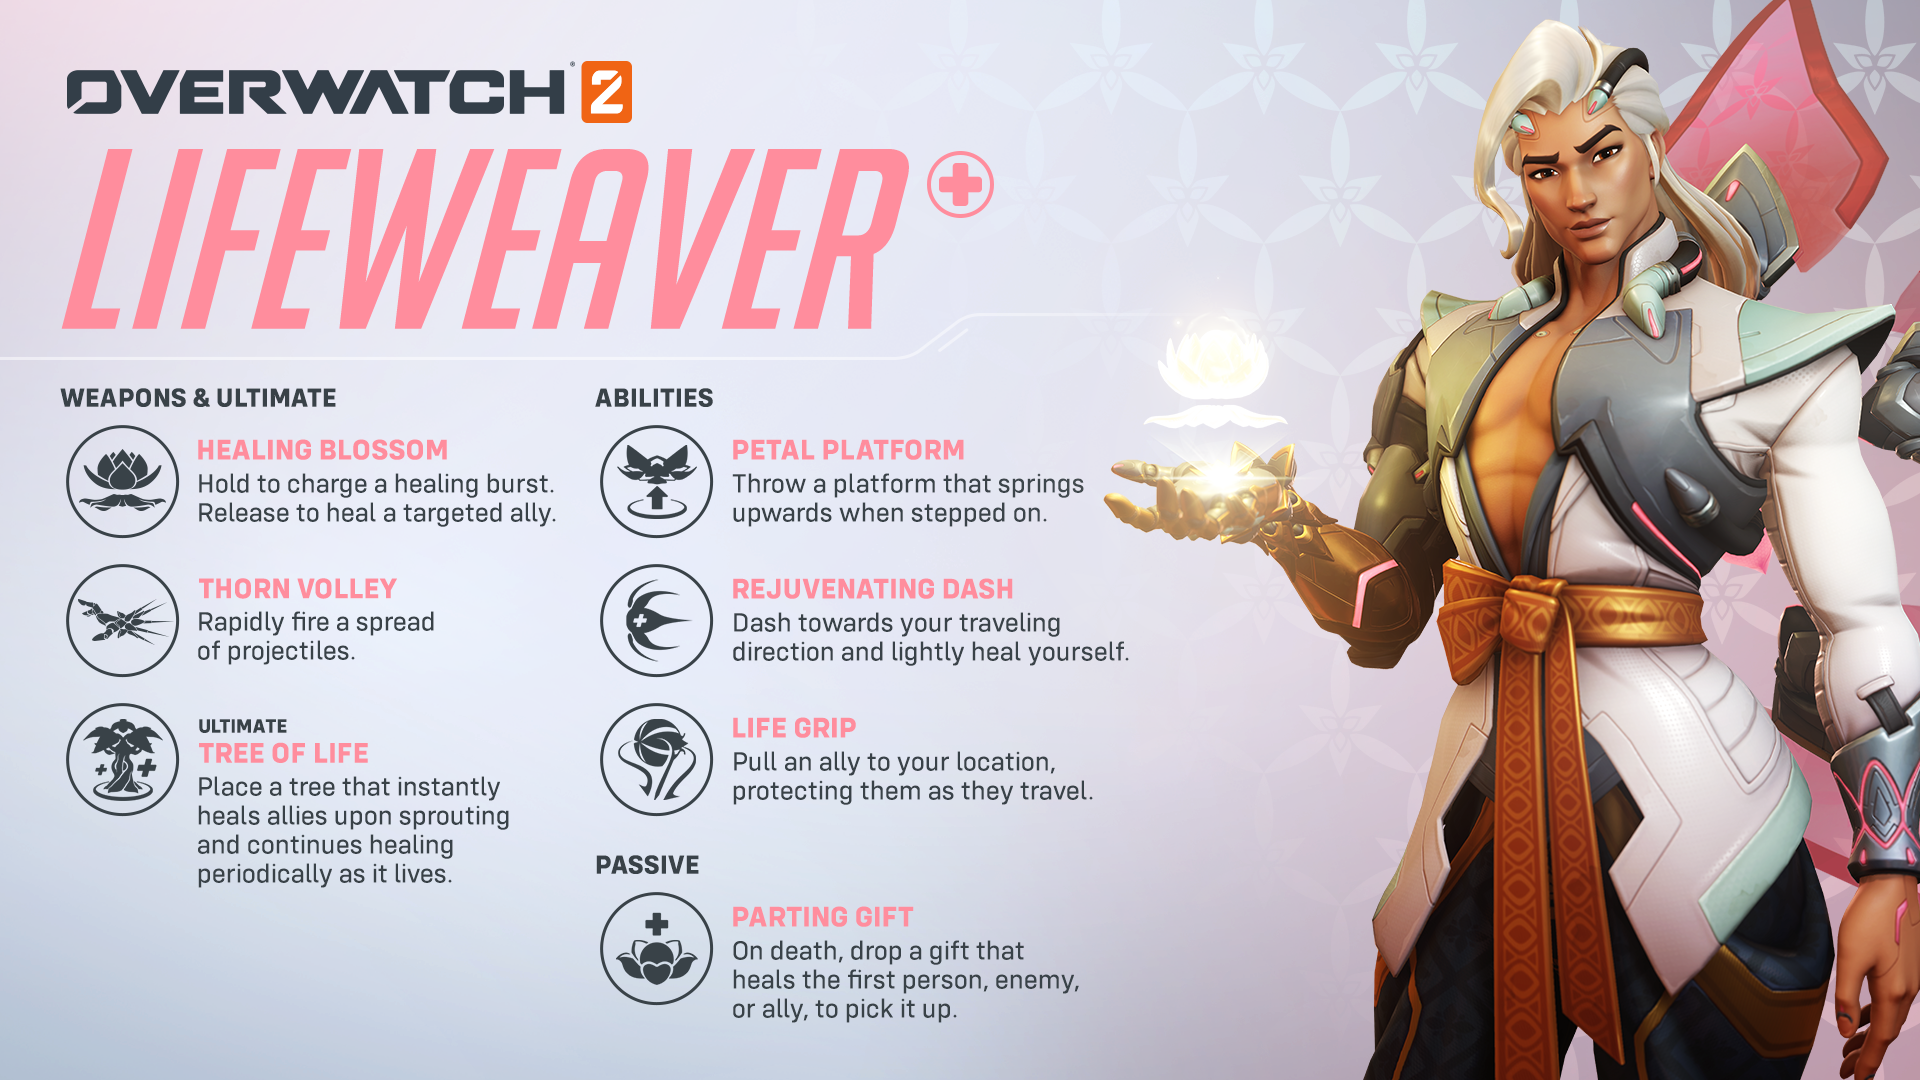 Lifeweaver's Weapons, Ultimate, Abilities, and Passive via Overwatch 2 (2022), Blizzard Entertainment